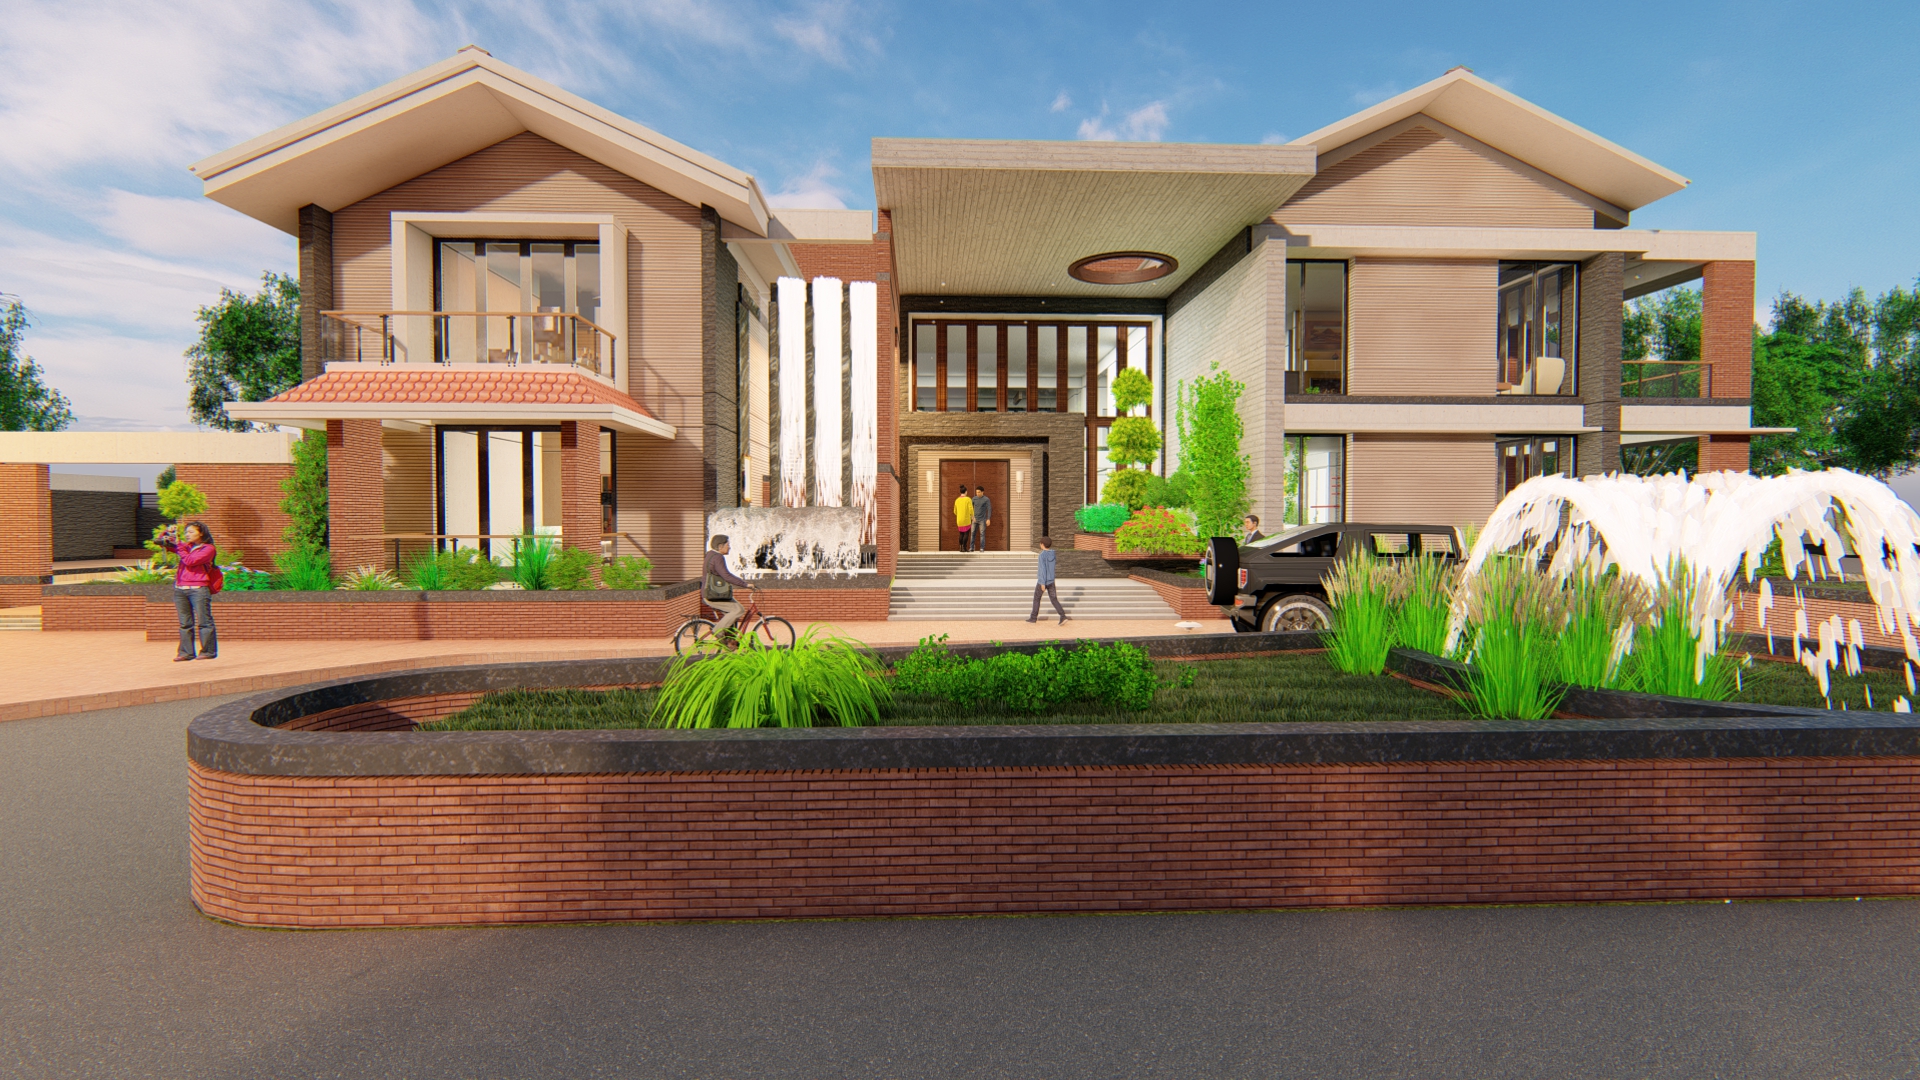 MD RESIDENCE in 3d max Other Bild